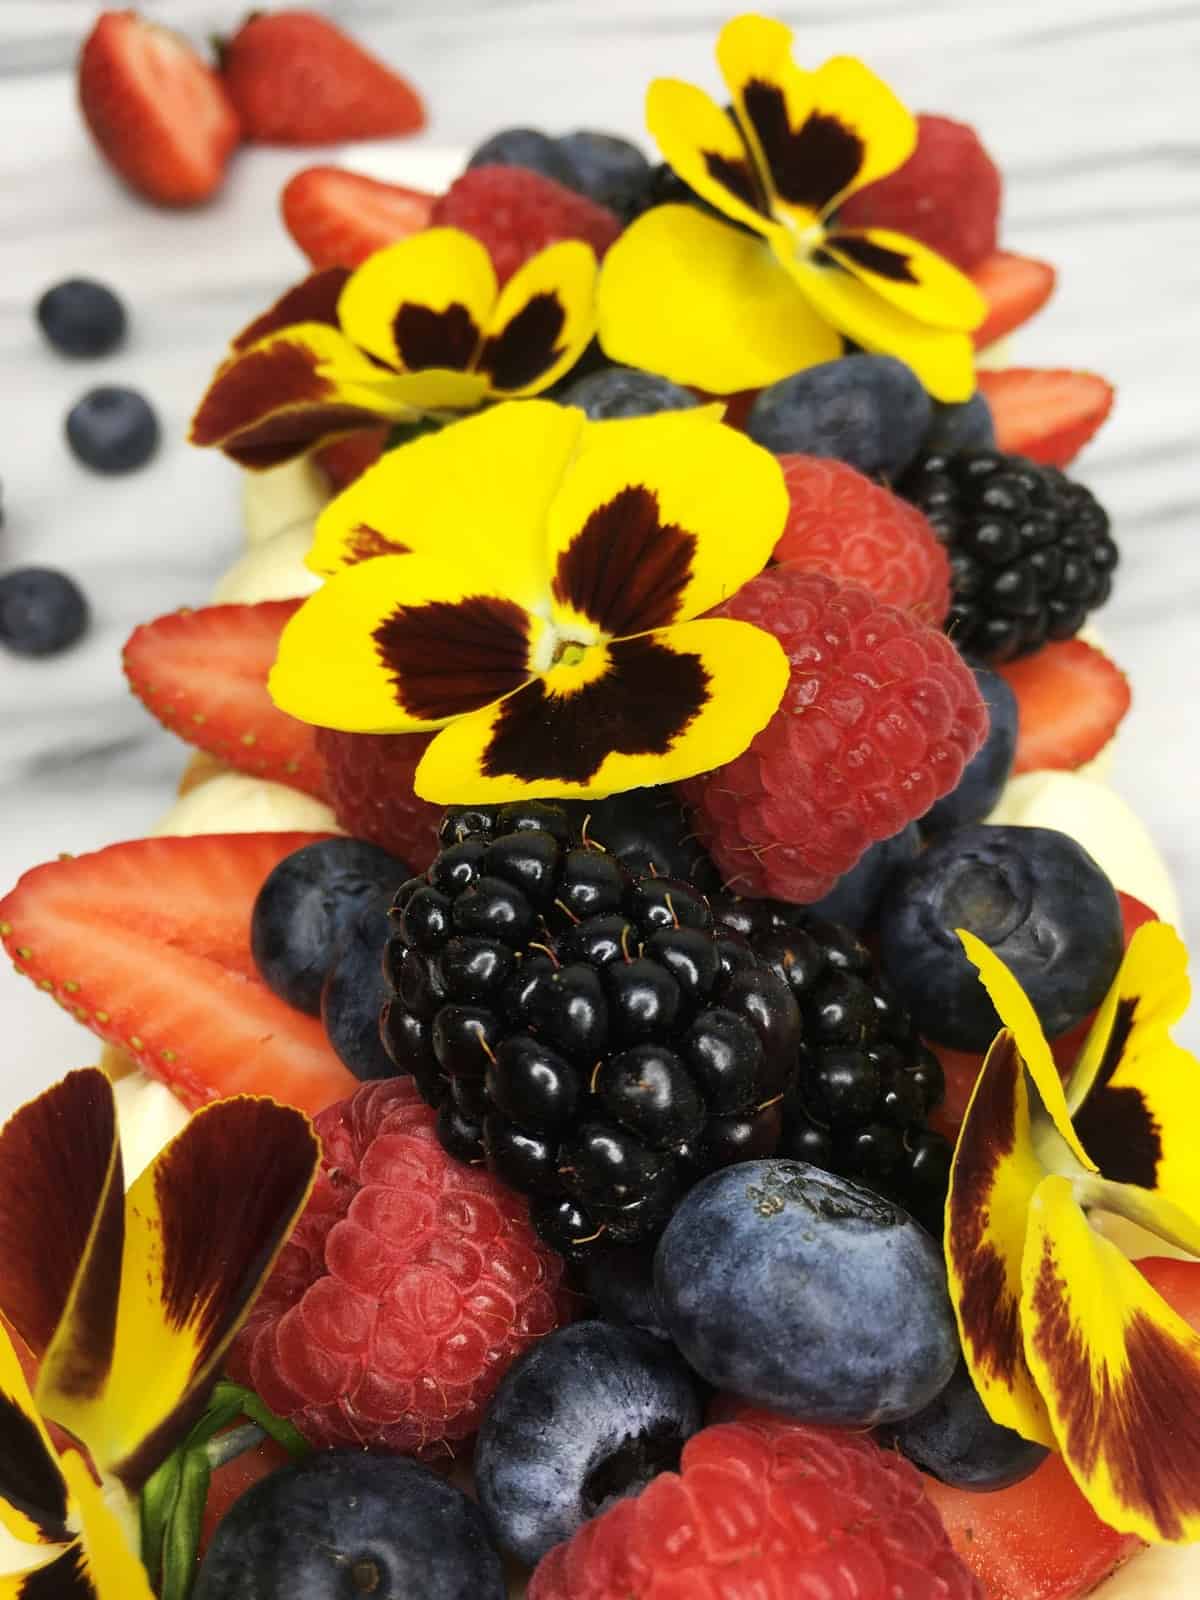 Cake decorated with fresh red fruit and edible flowers: Close up